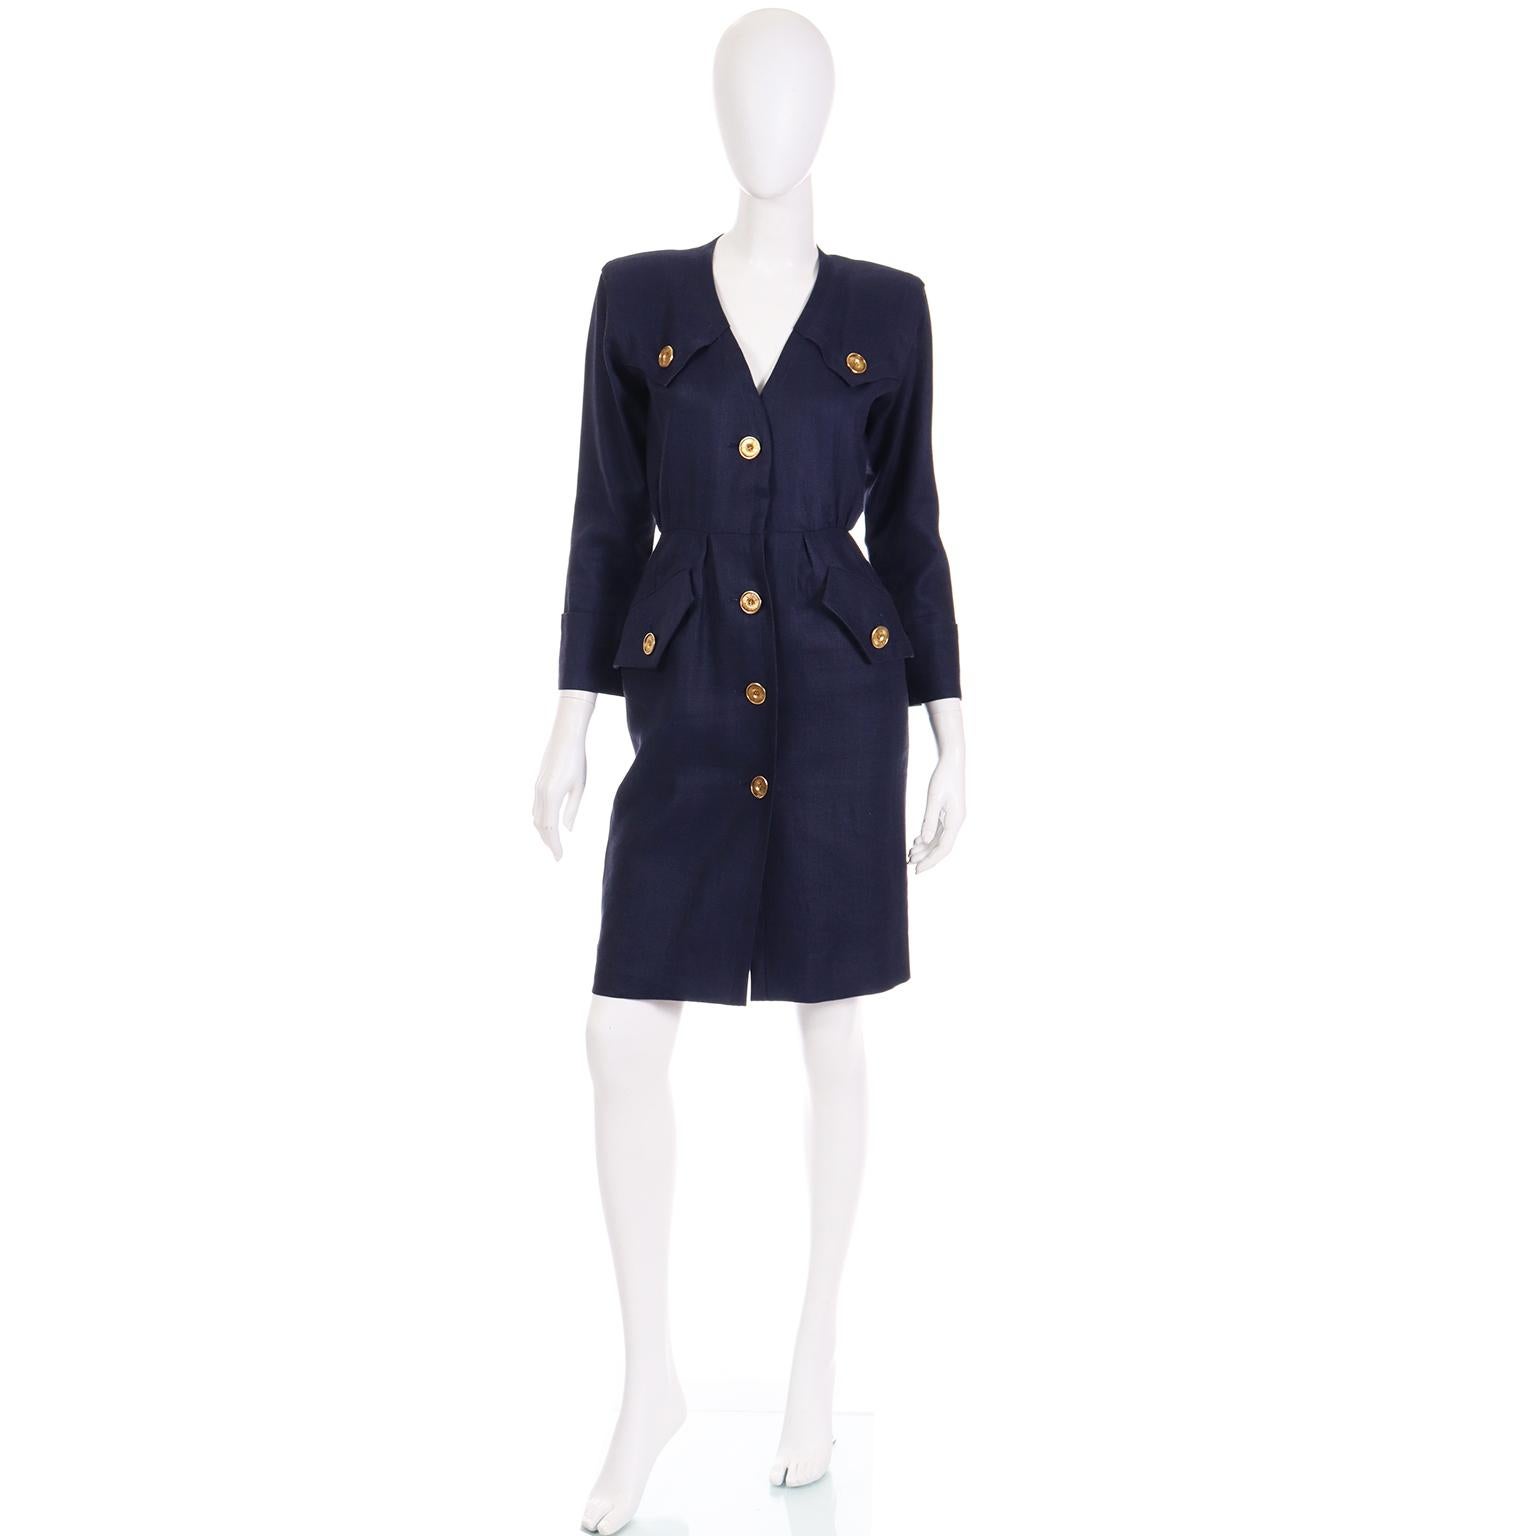 This vintage 1987 Yves Saint Laurent long sleeve dress is in a luxe dark navy blue flax linen. The dress has large gold buttons and it can be worn with or without a belt you already own! This dress style was a signature look throughout YSL's career,